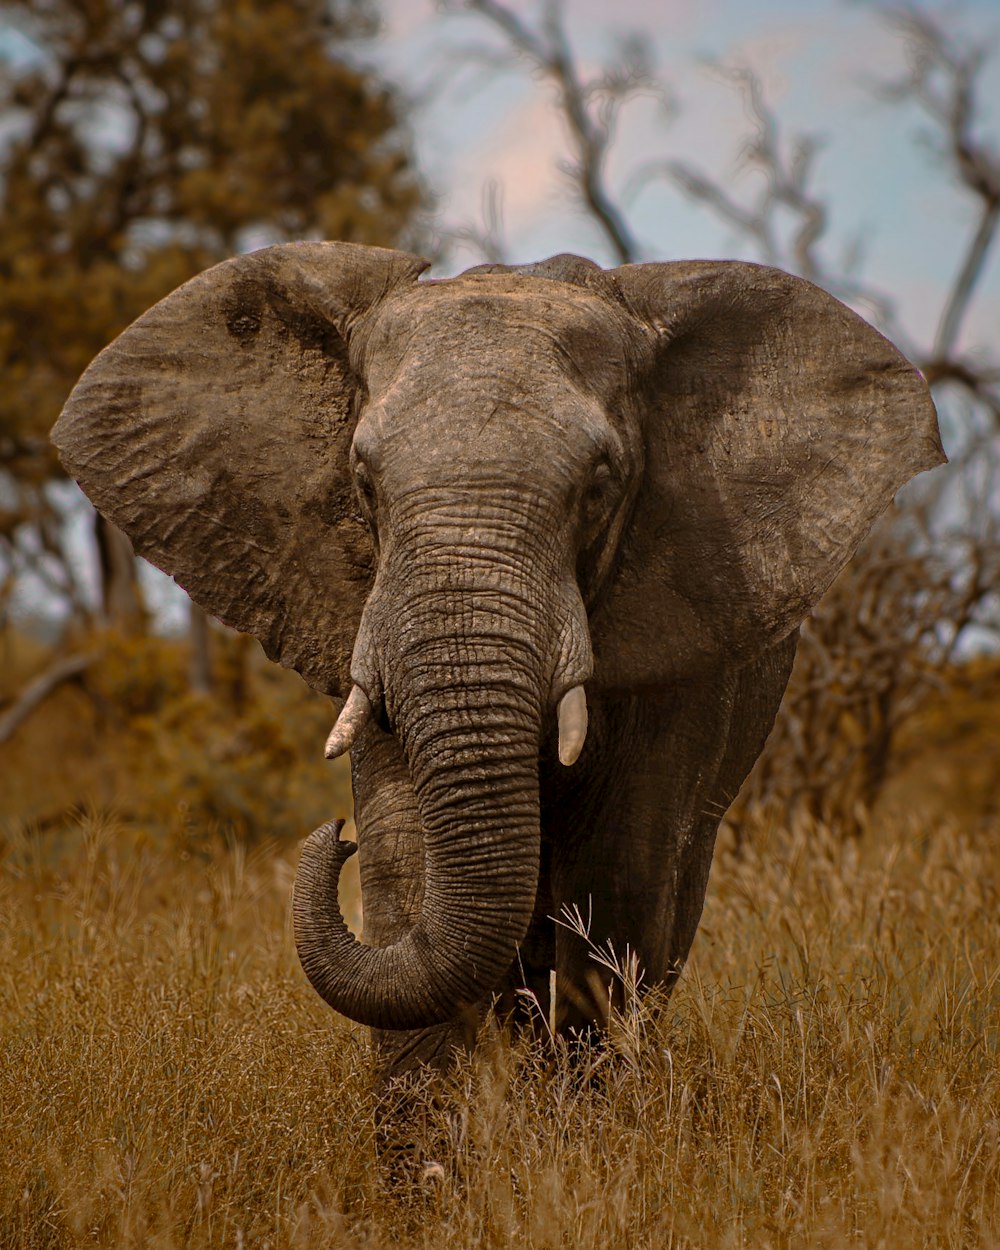 an elephant standing in a grassy field with trees in the background